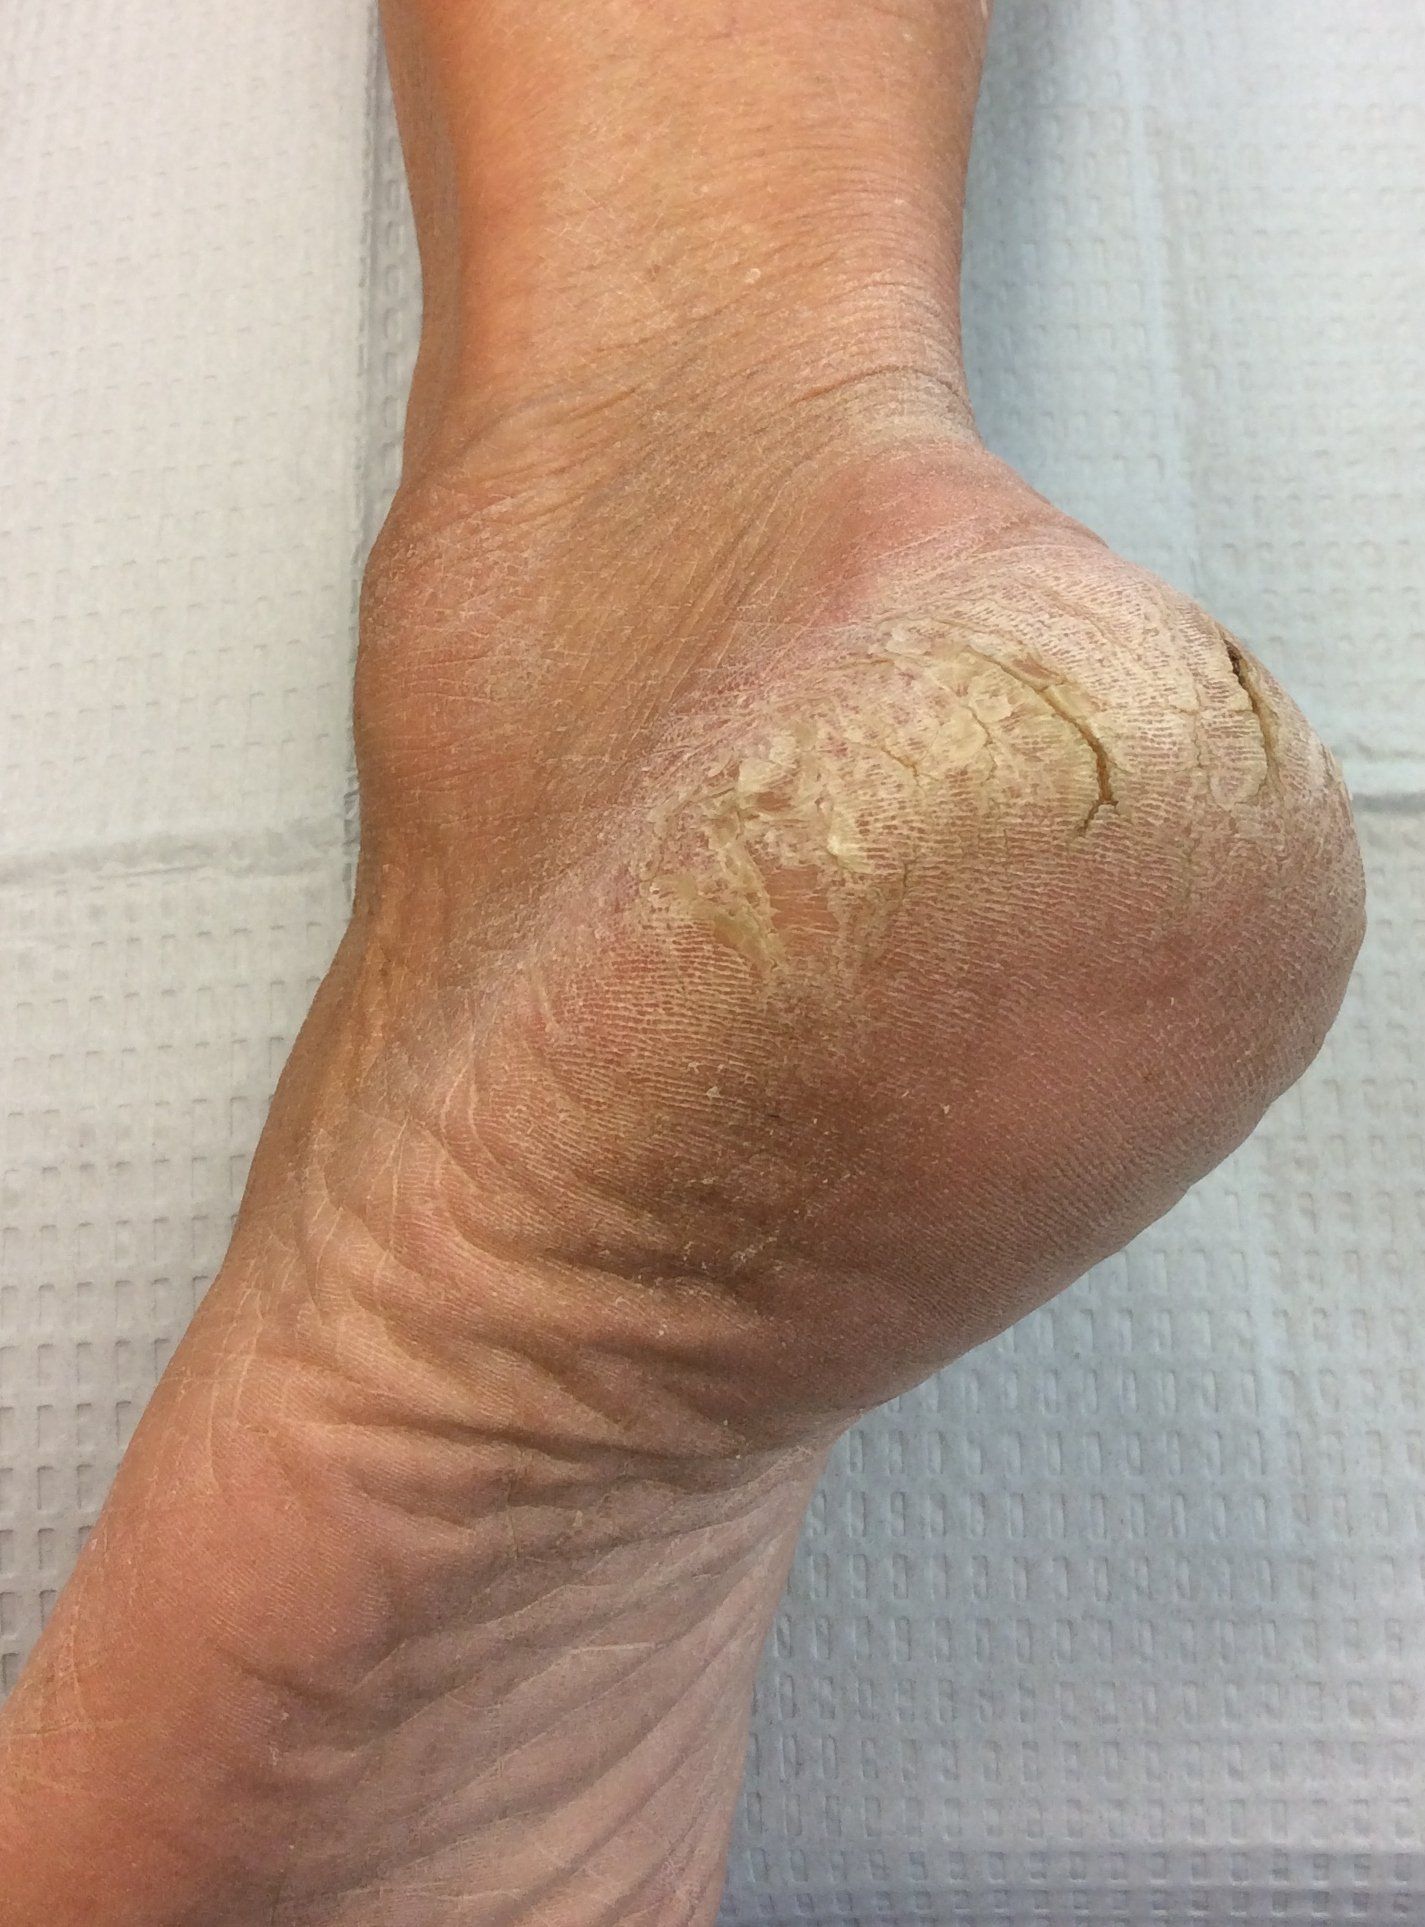 Callus on the bottom of foot picture